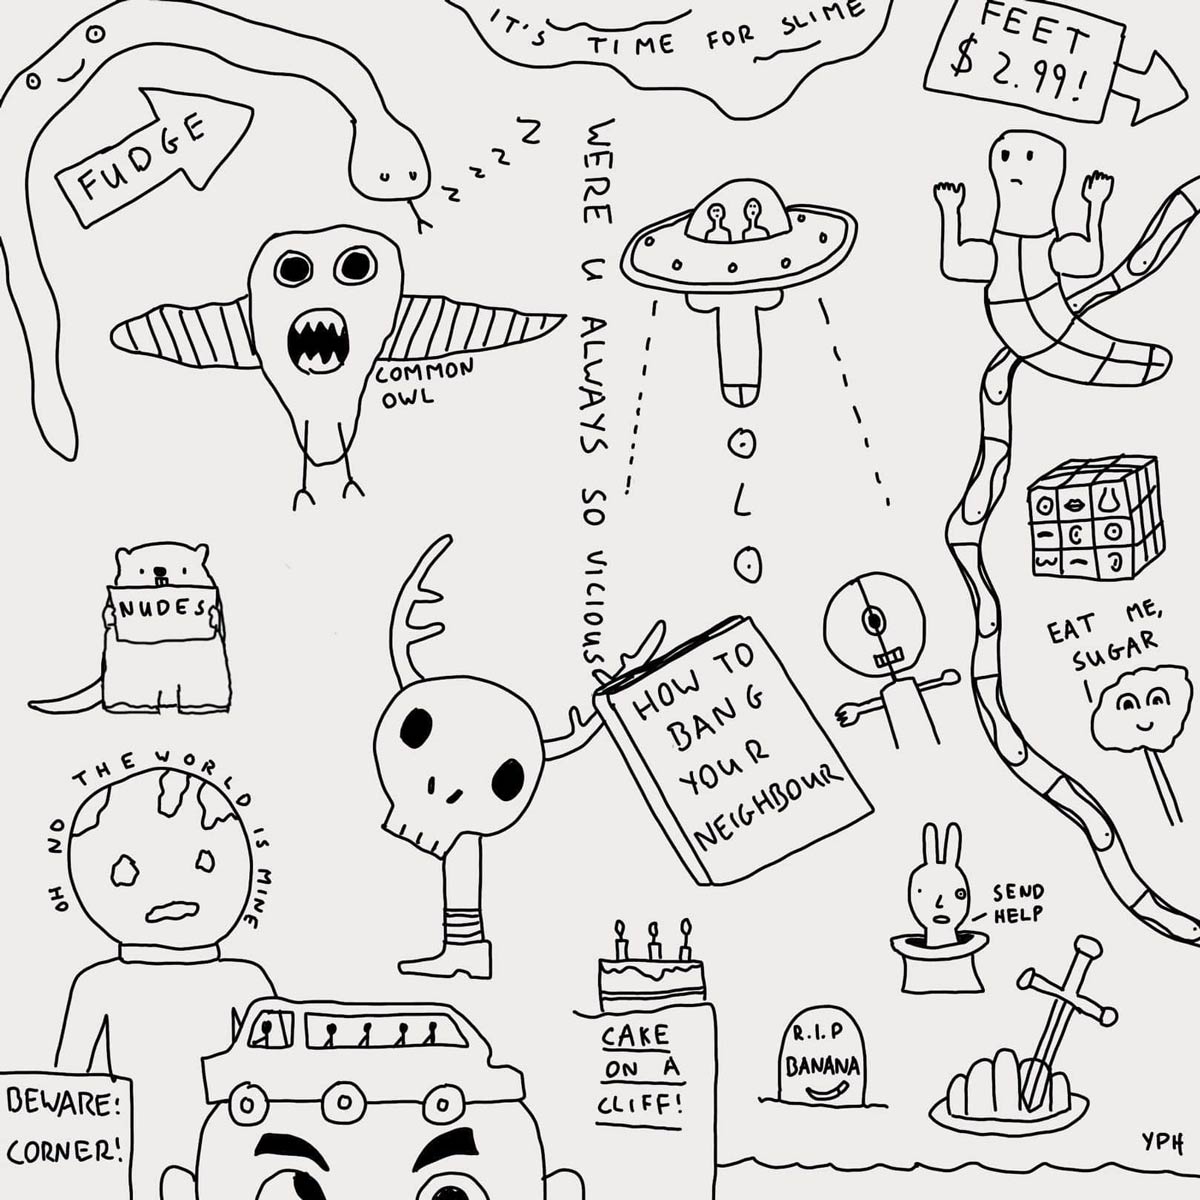 My friend asked me to design him a tattoo but didn't specify what he wanted. This is the flash sheet he got